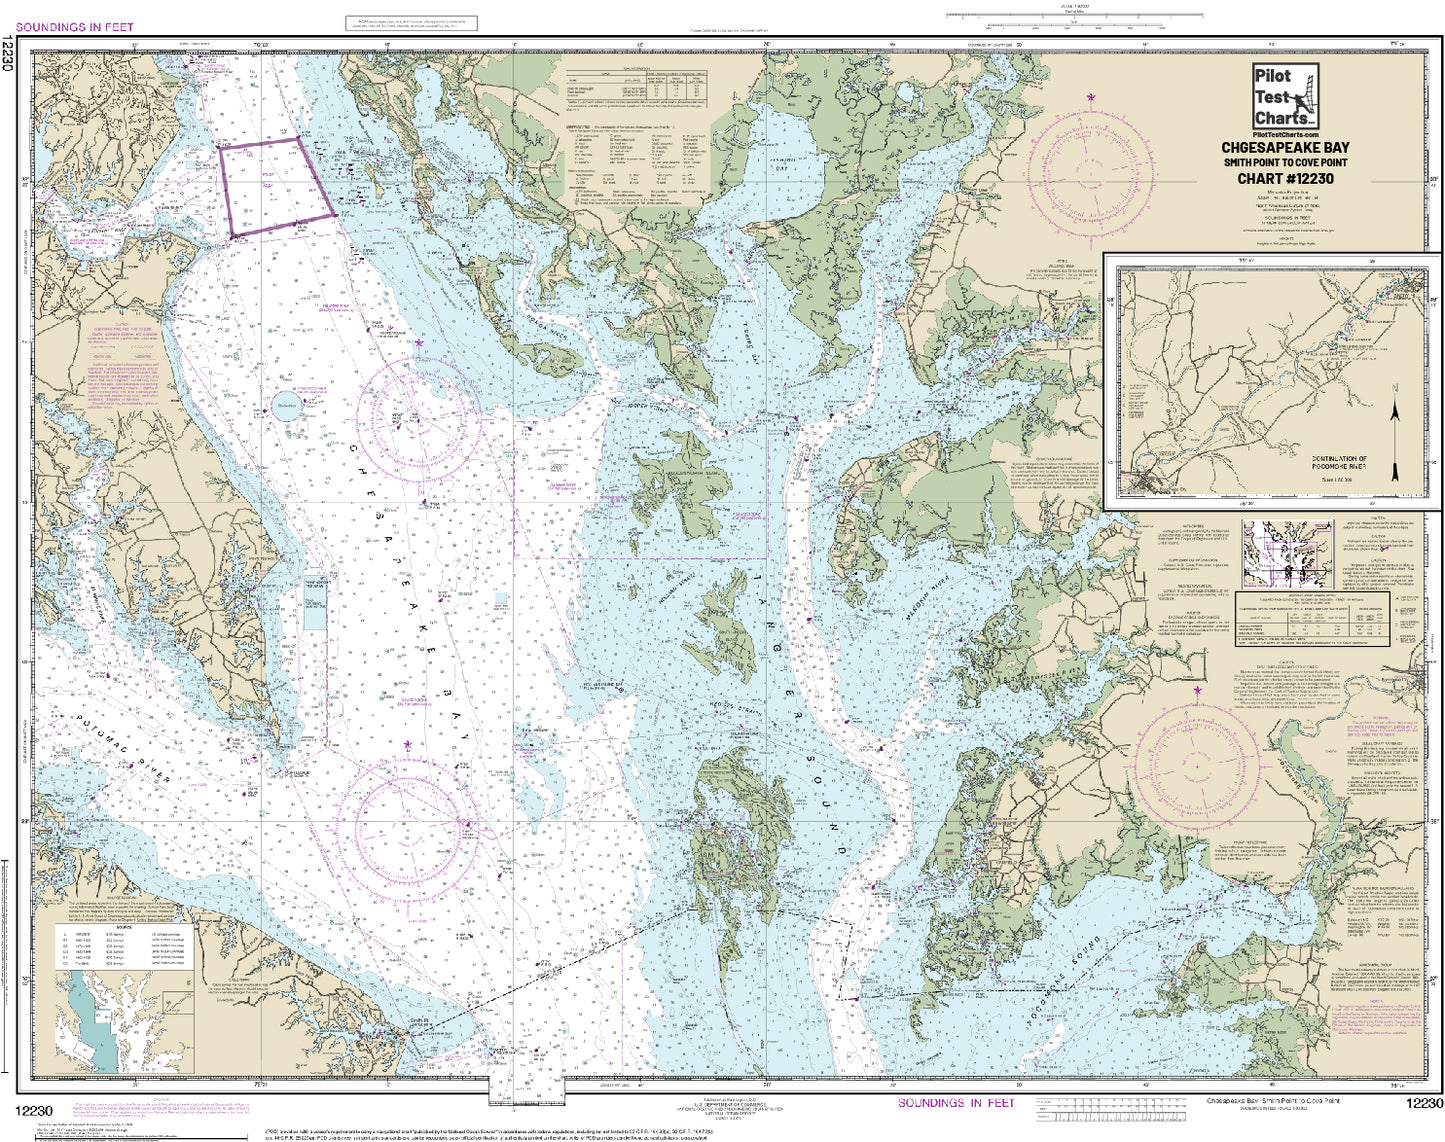 #12230 Chesapeake Bay, Smith Point to Cove Point Chart